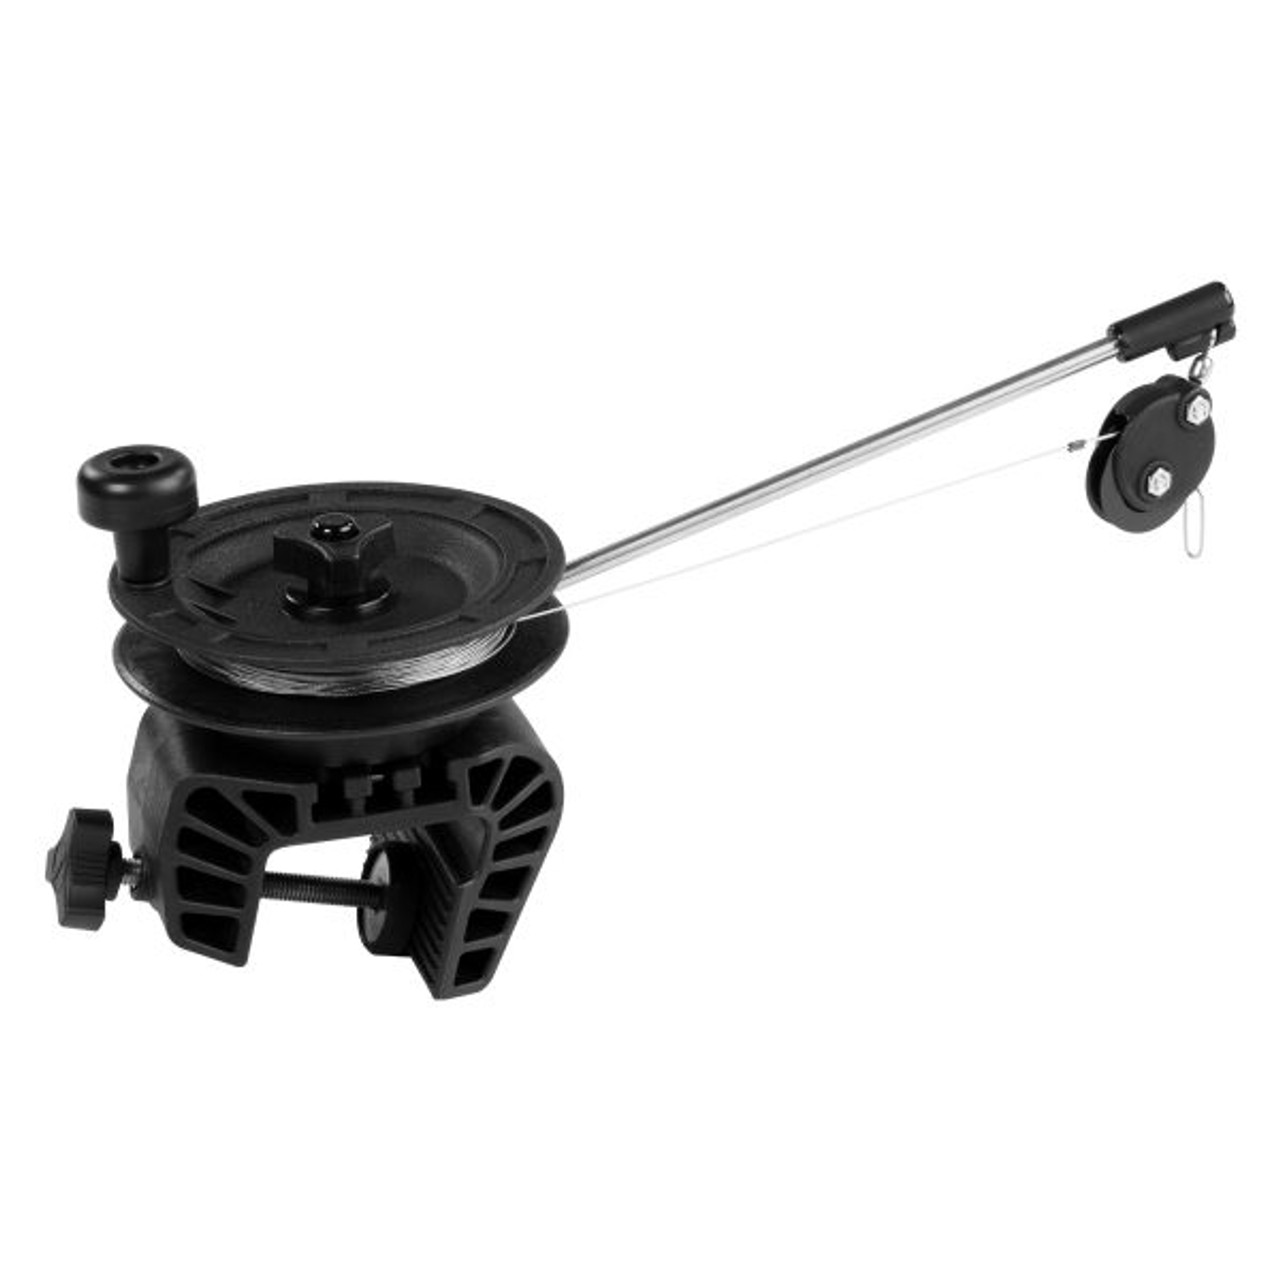 SCOTTY 1071 LAKETROLLER WITH PORTABLE CLAMP MOUNT